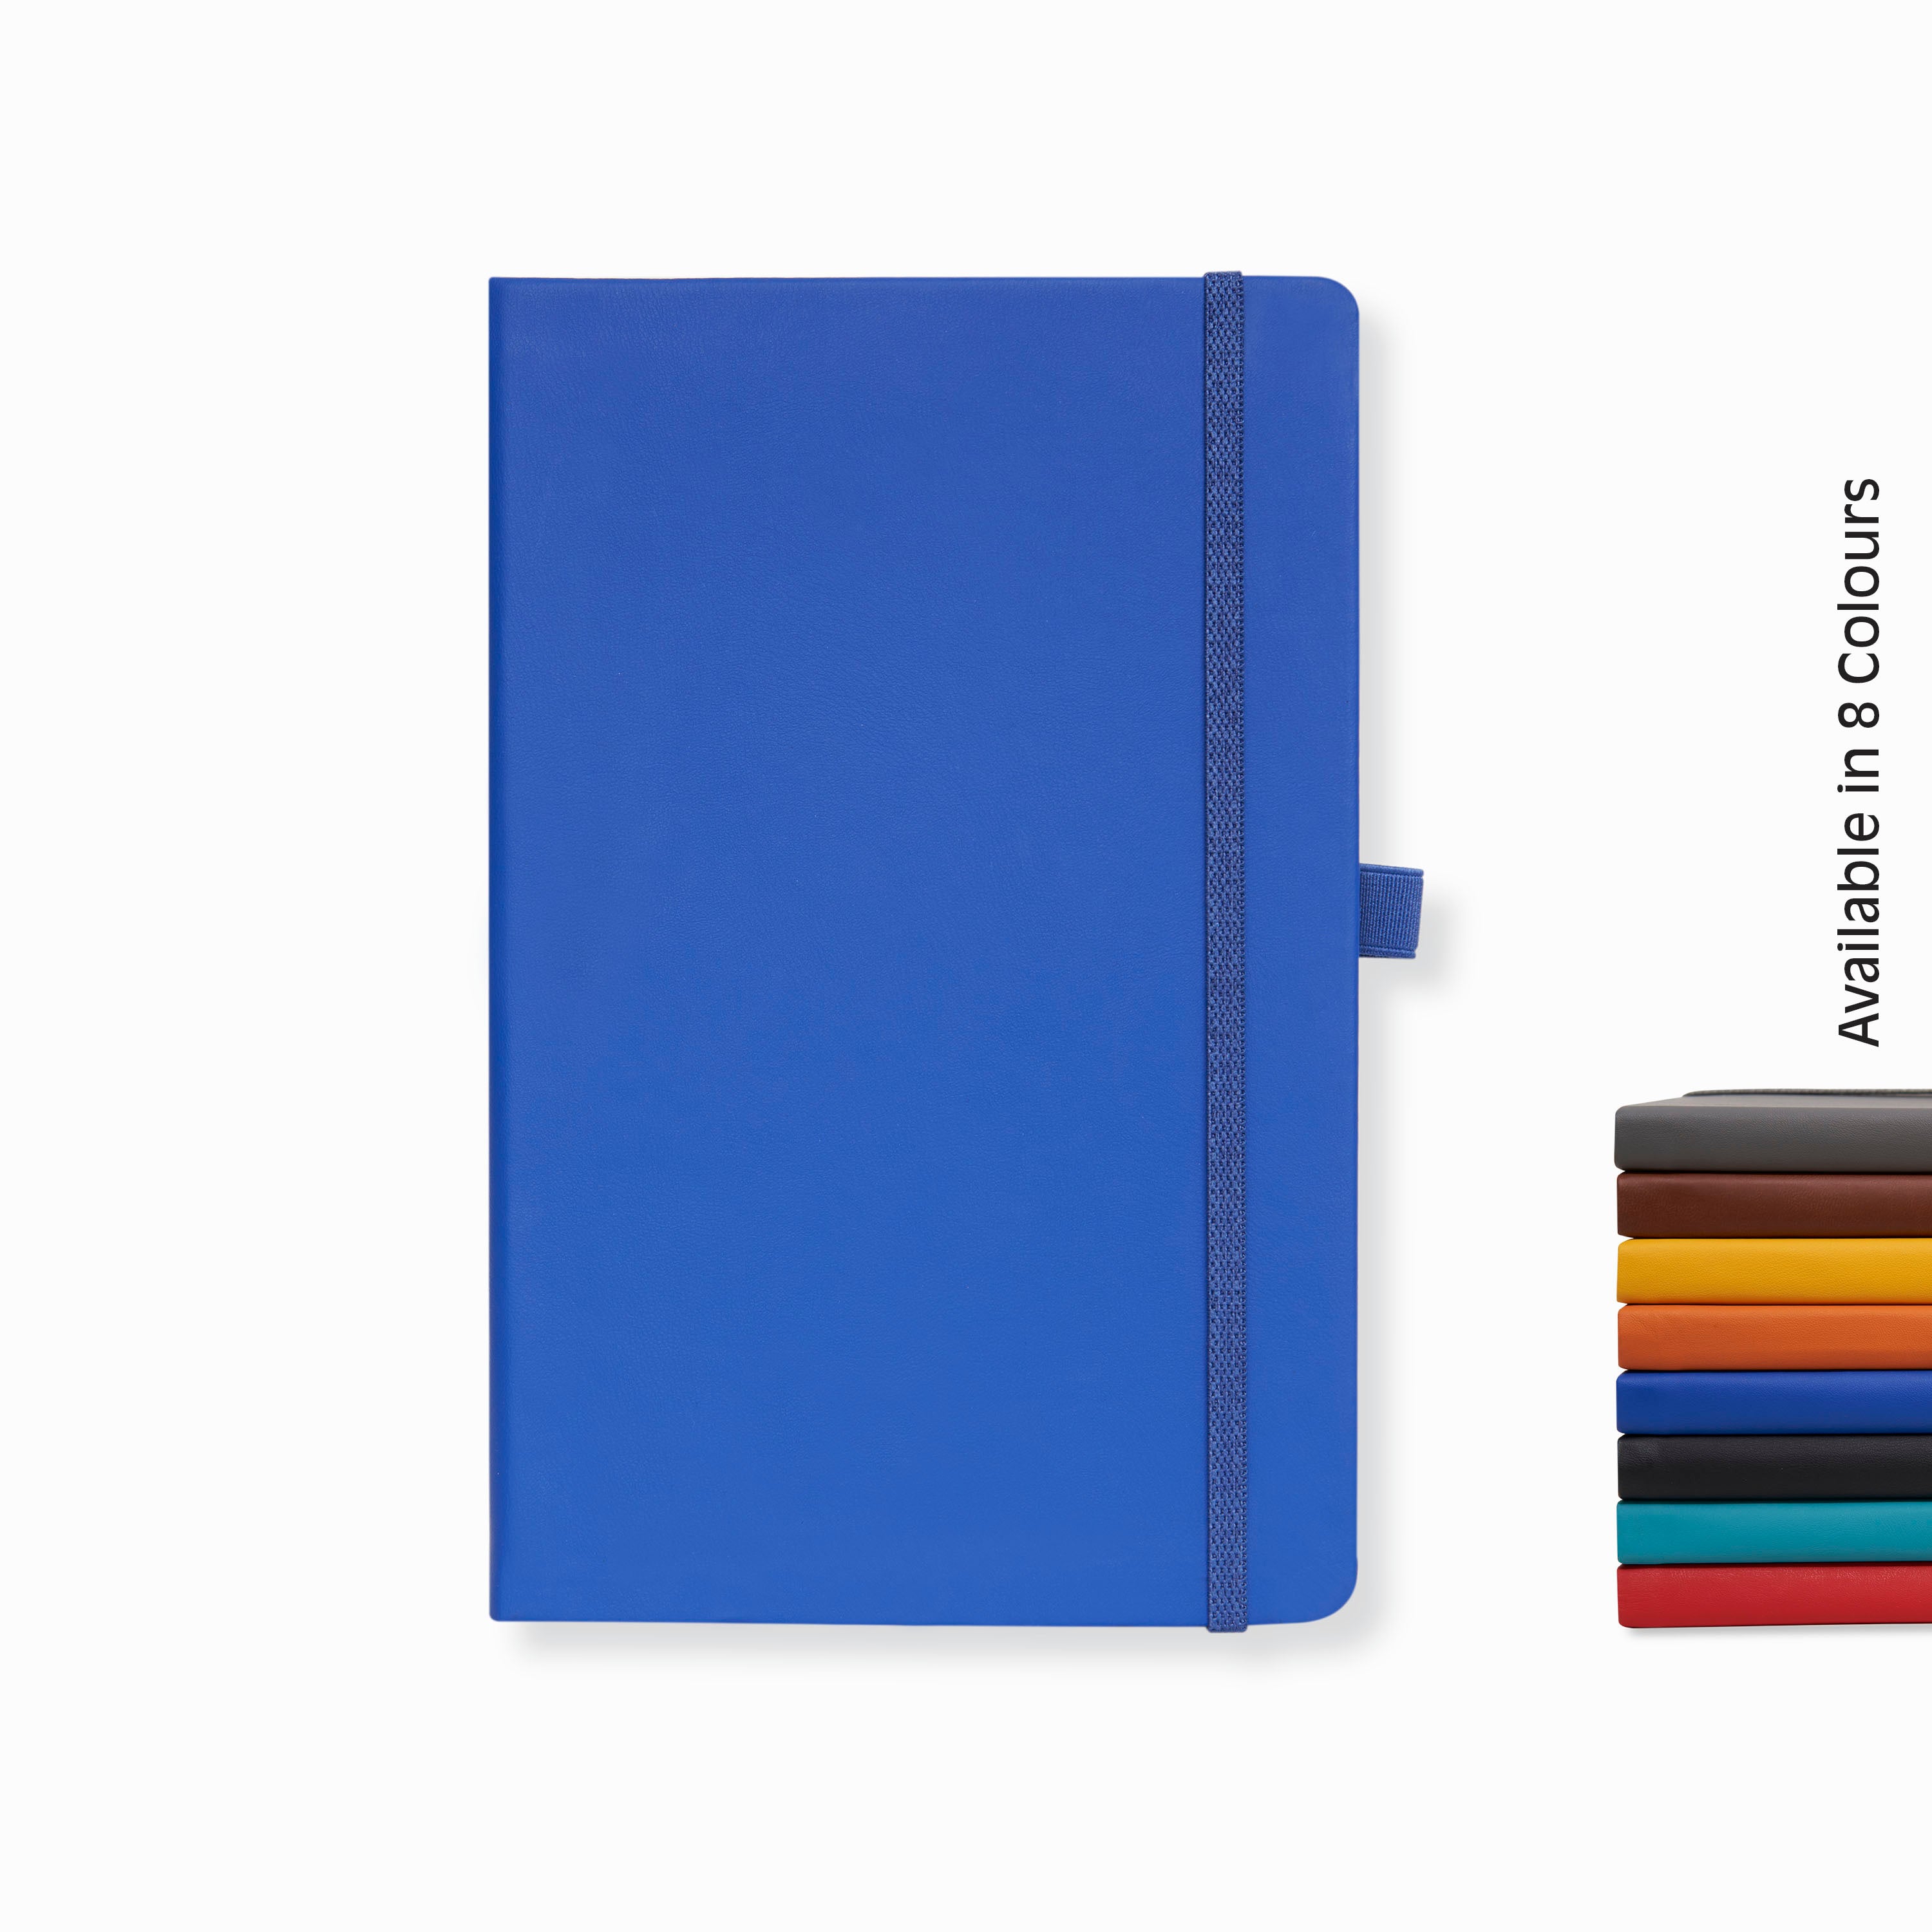 Doodle Pro Series Executive A5 PU Leather Hardbound Ruled Diary with Pen Loop - BLUE